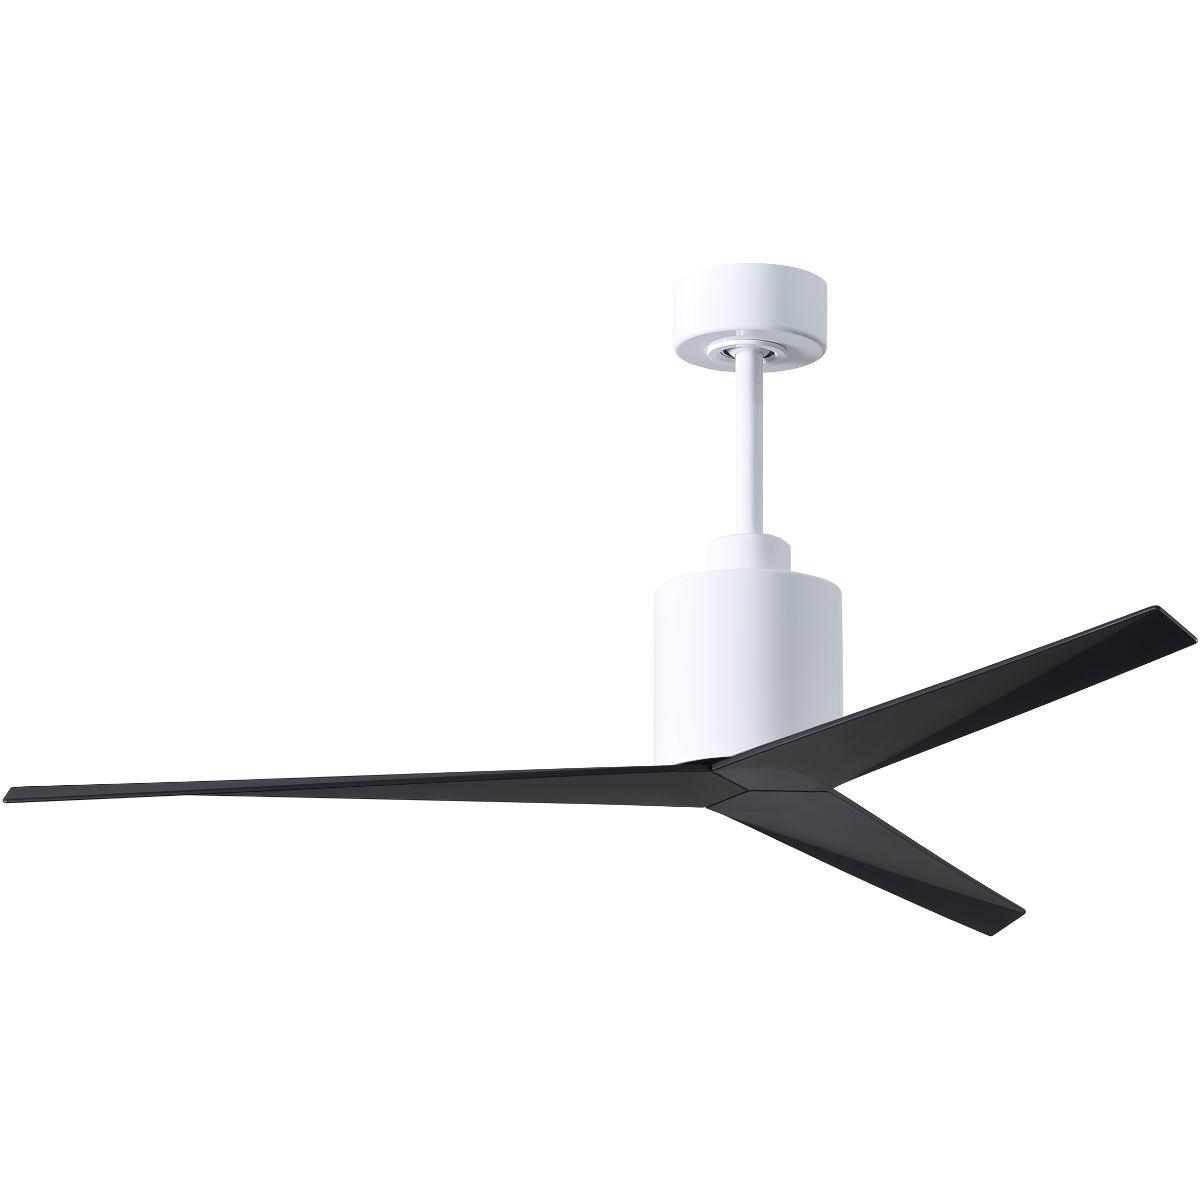 Eliza 56 Inch Propeller Outdoor Ceiling Fan, Wall/Remote Control Included